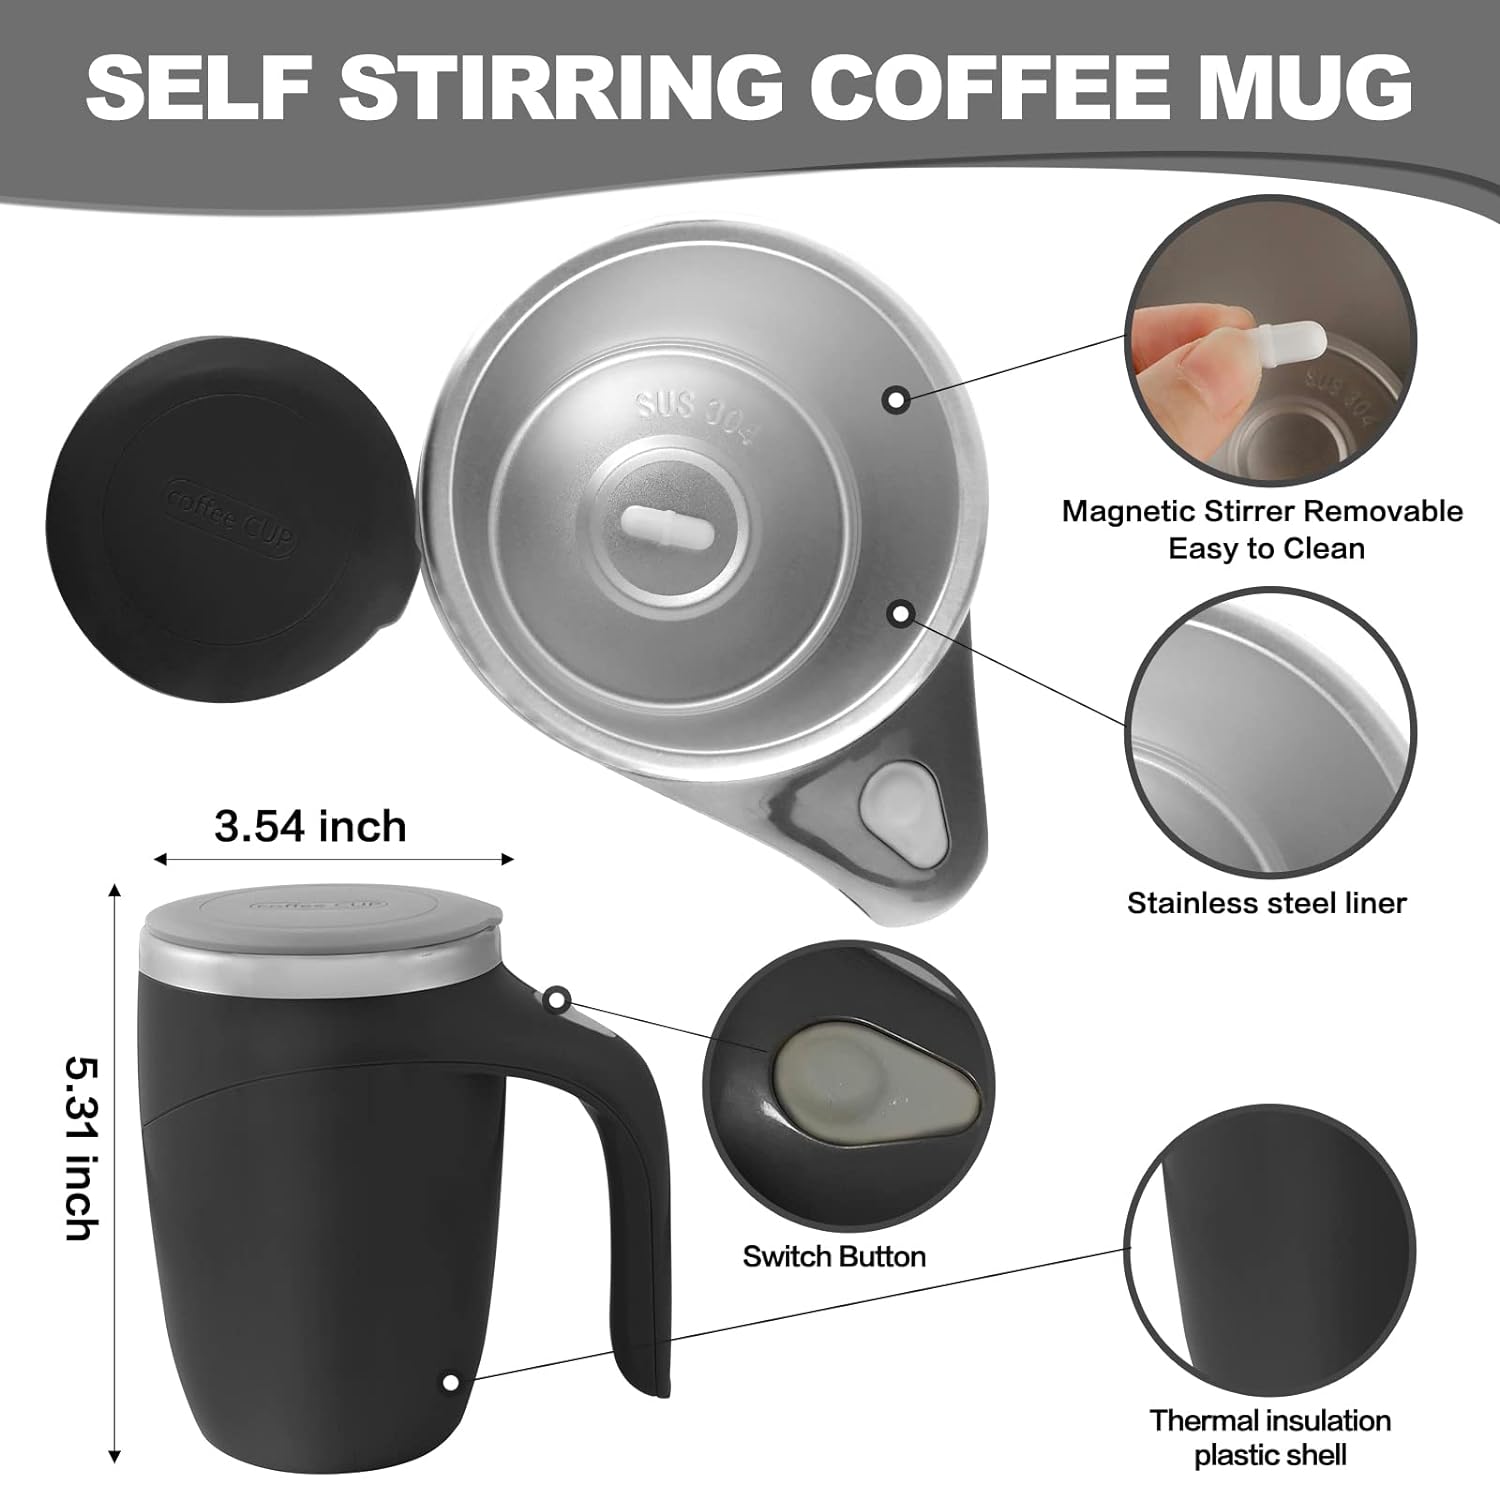 SkyShopy Automatic Magnetic Stirring Coffee Mug, Rotating Home Office Travel Mixing Cup，Funny Electric Stainless Steel Self Mixing Coffee Tumbler, Suitable for Coffee, Milk, Cocoa and Other Beverages (Multicoloured)